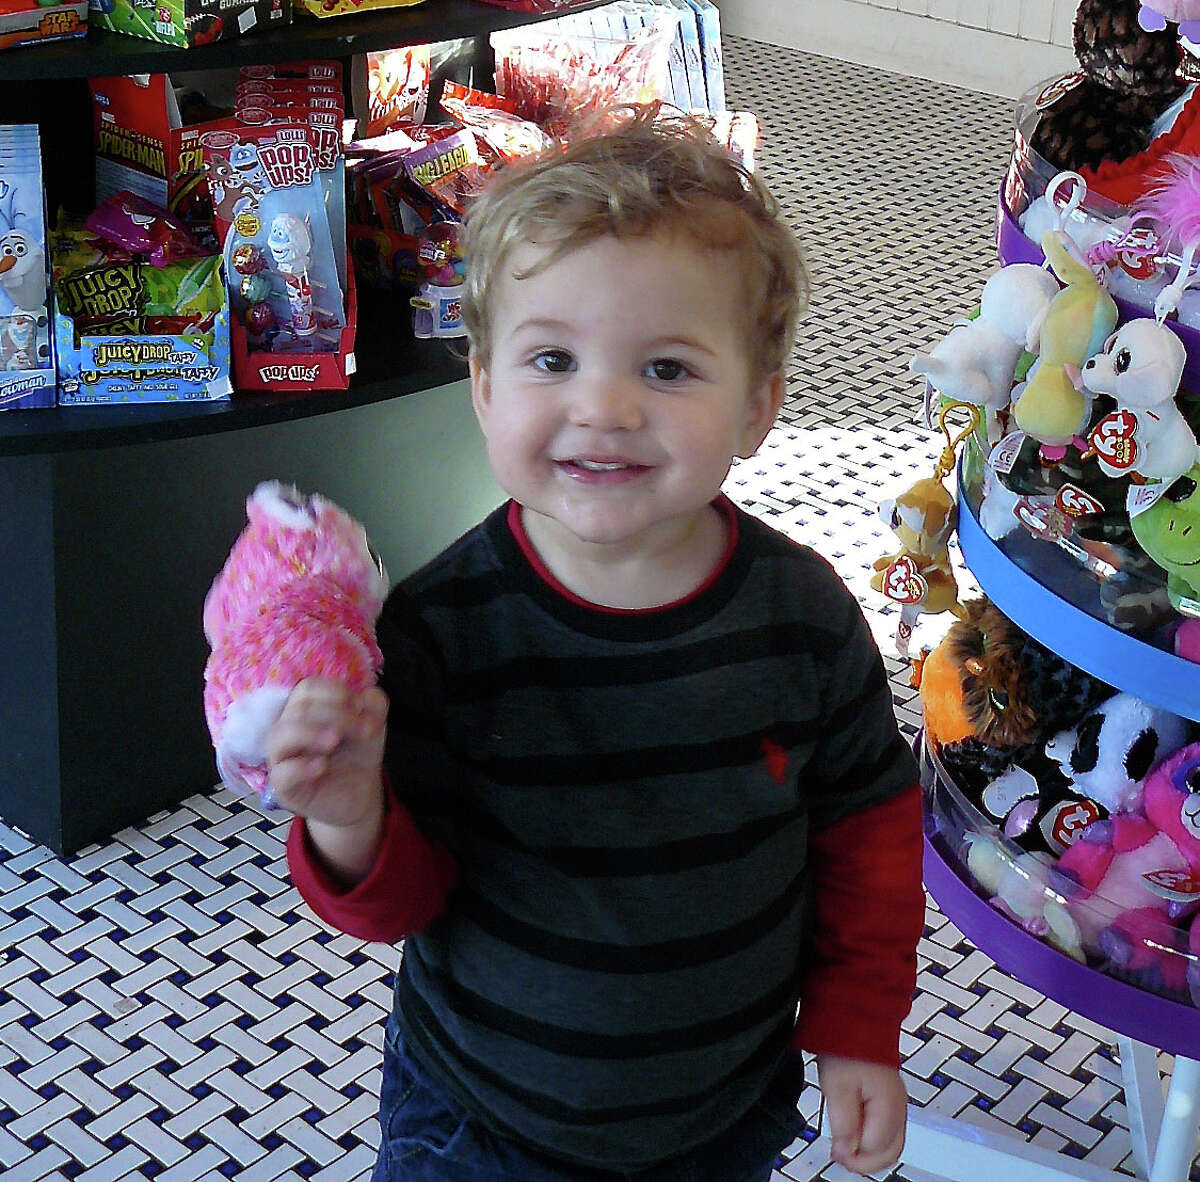 Two-year-old Bennett Gotfried of Fairfield chose a toy over ice cream during a recent visit to the Saugatuck Sweets shop in Westport.